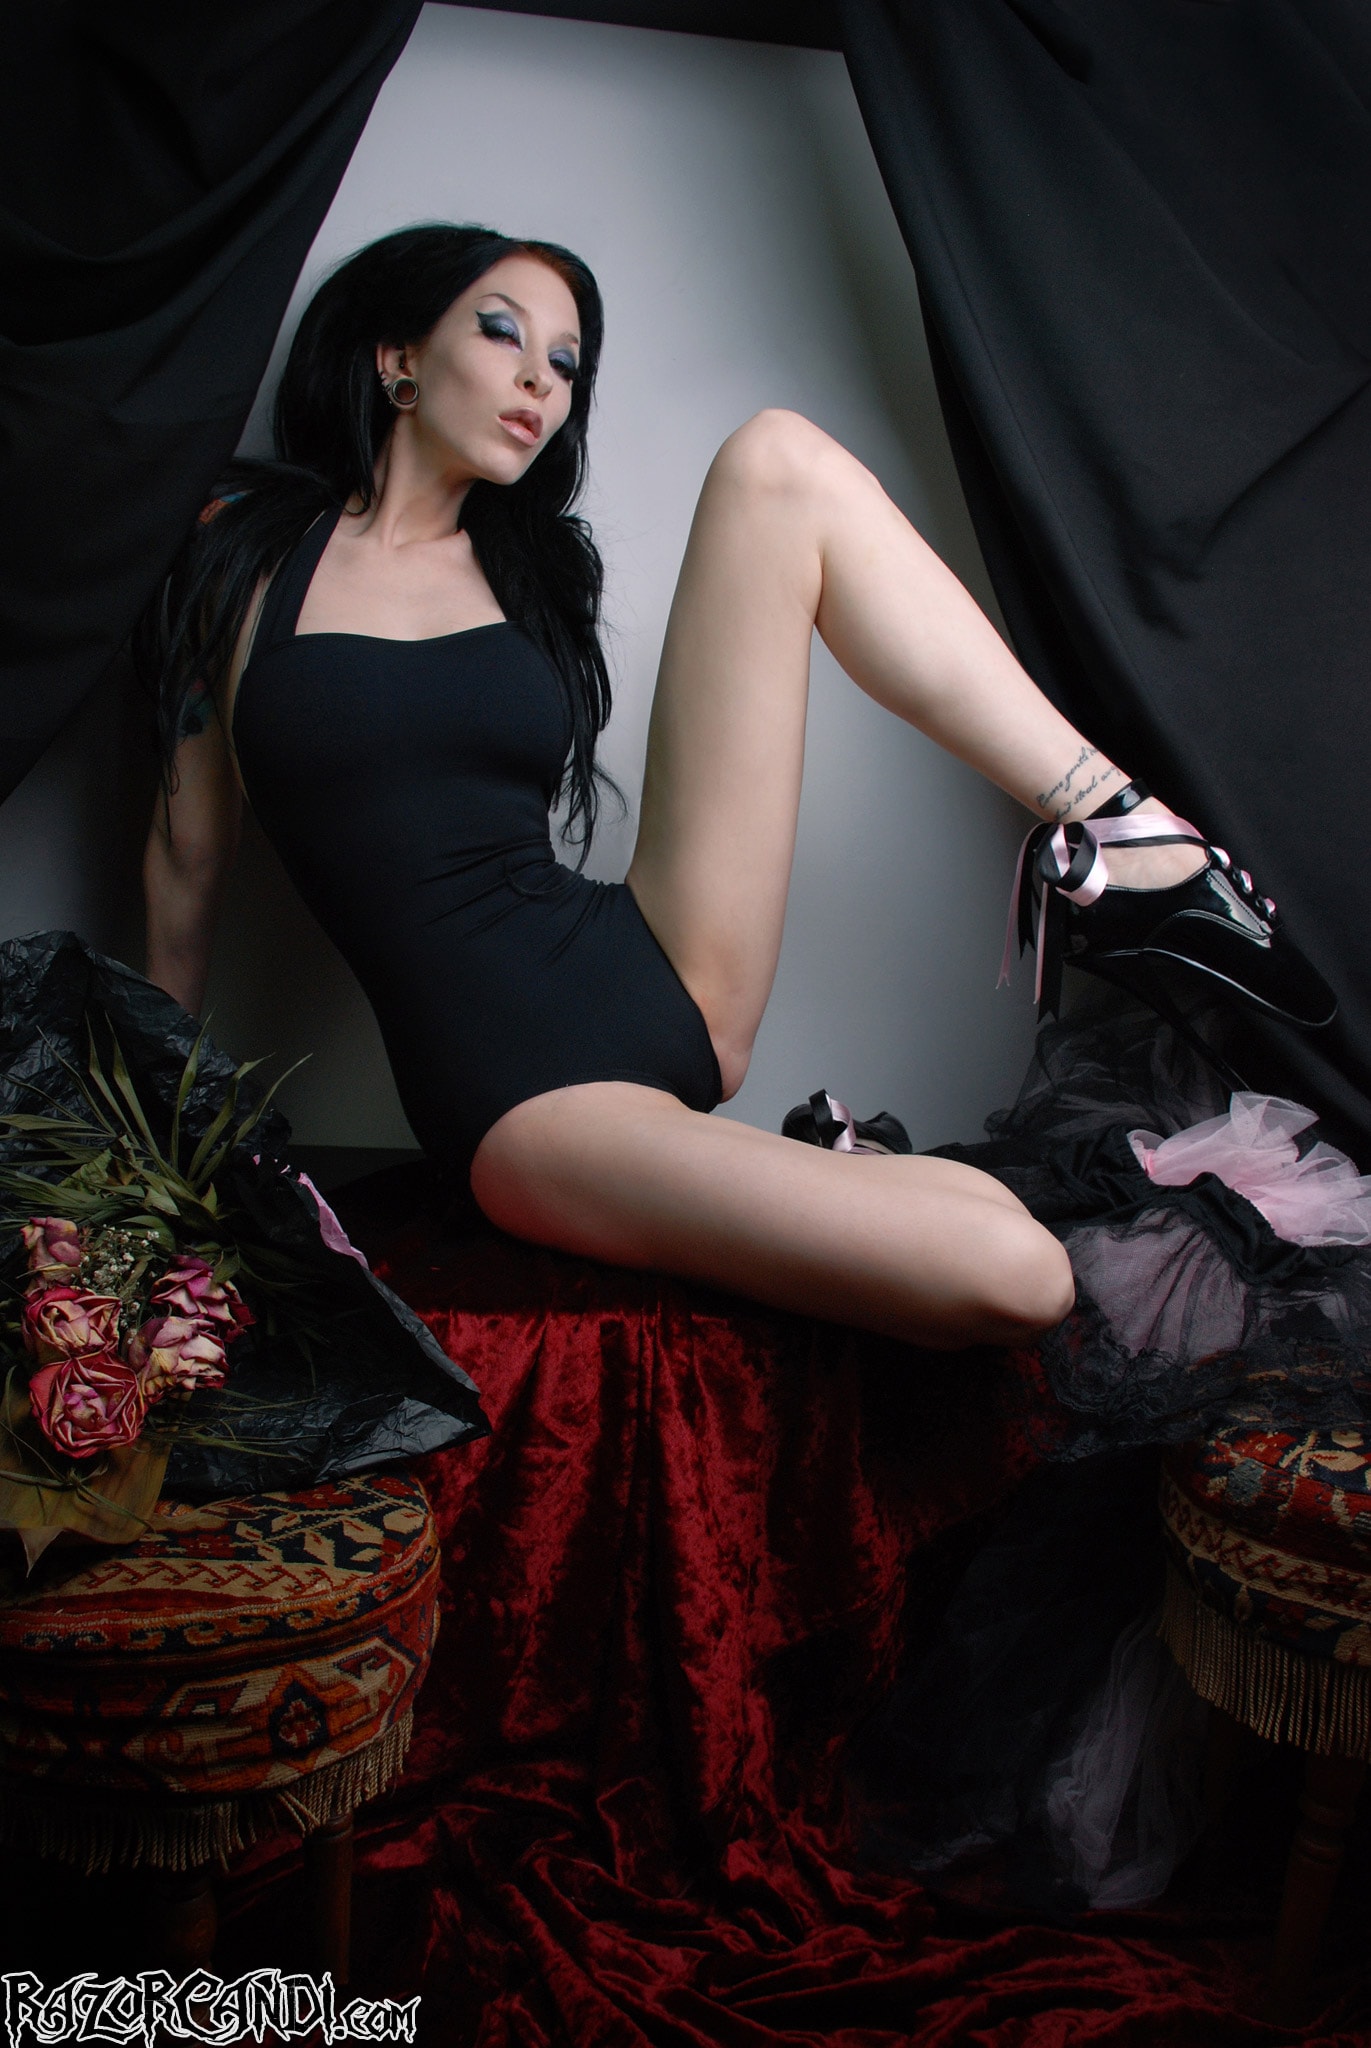 Razor Candi - Leggy Gothic babe in sexy fetish ballet shoes | Picture (8)